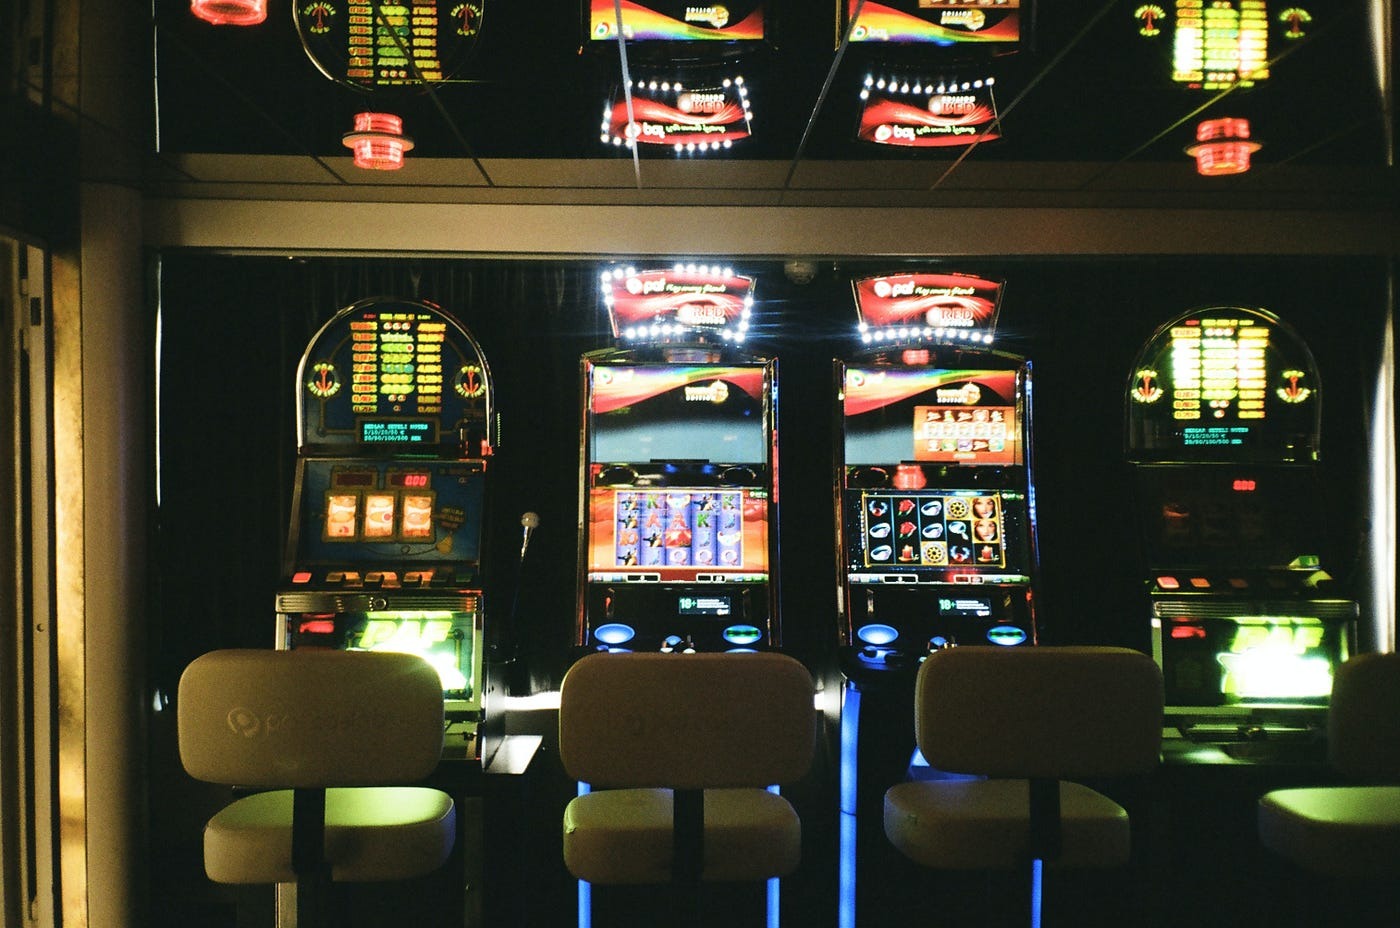 The fascinating maths and economics of slot machines